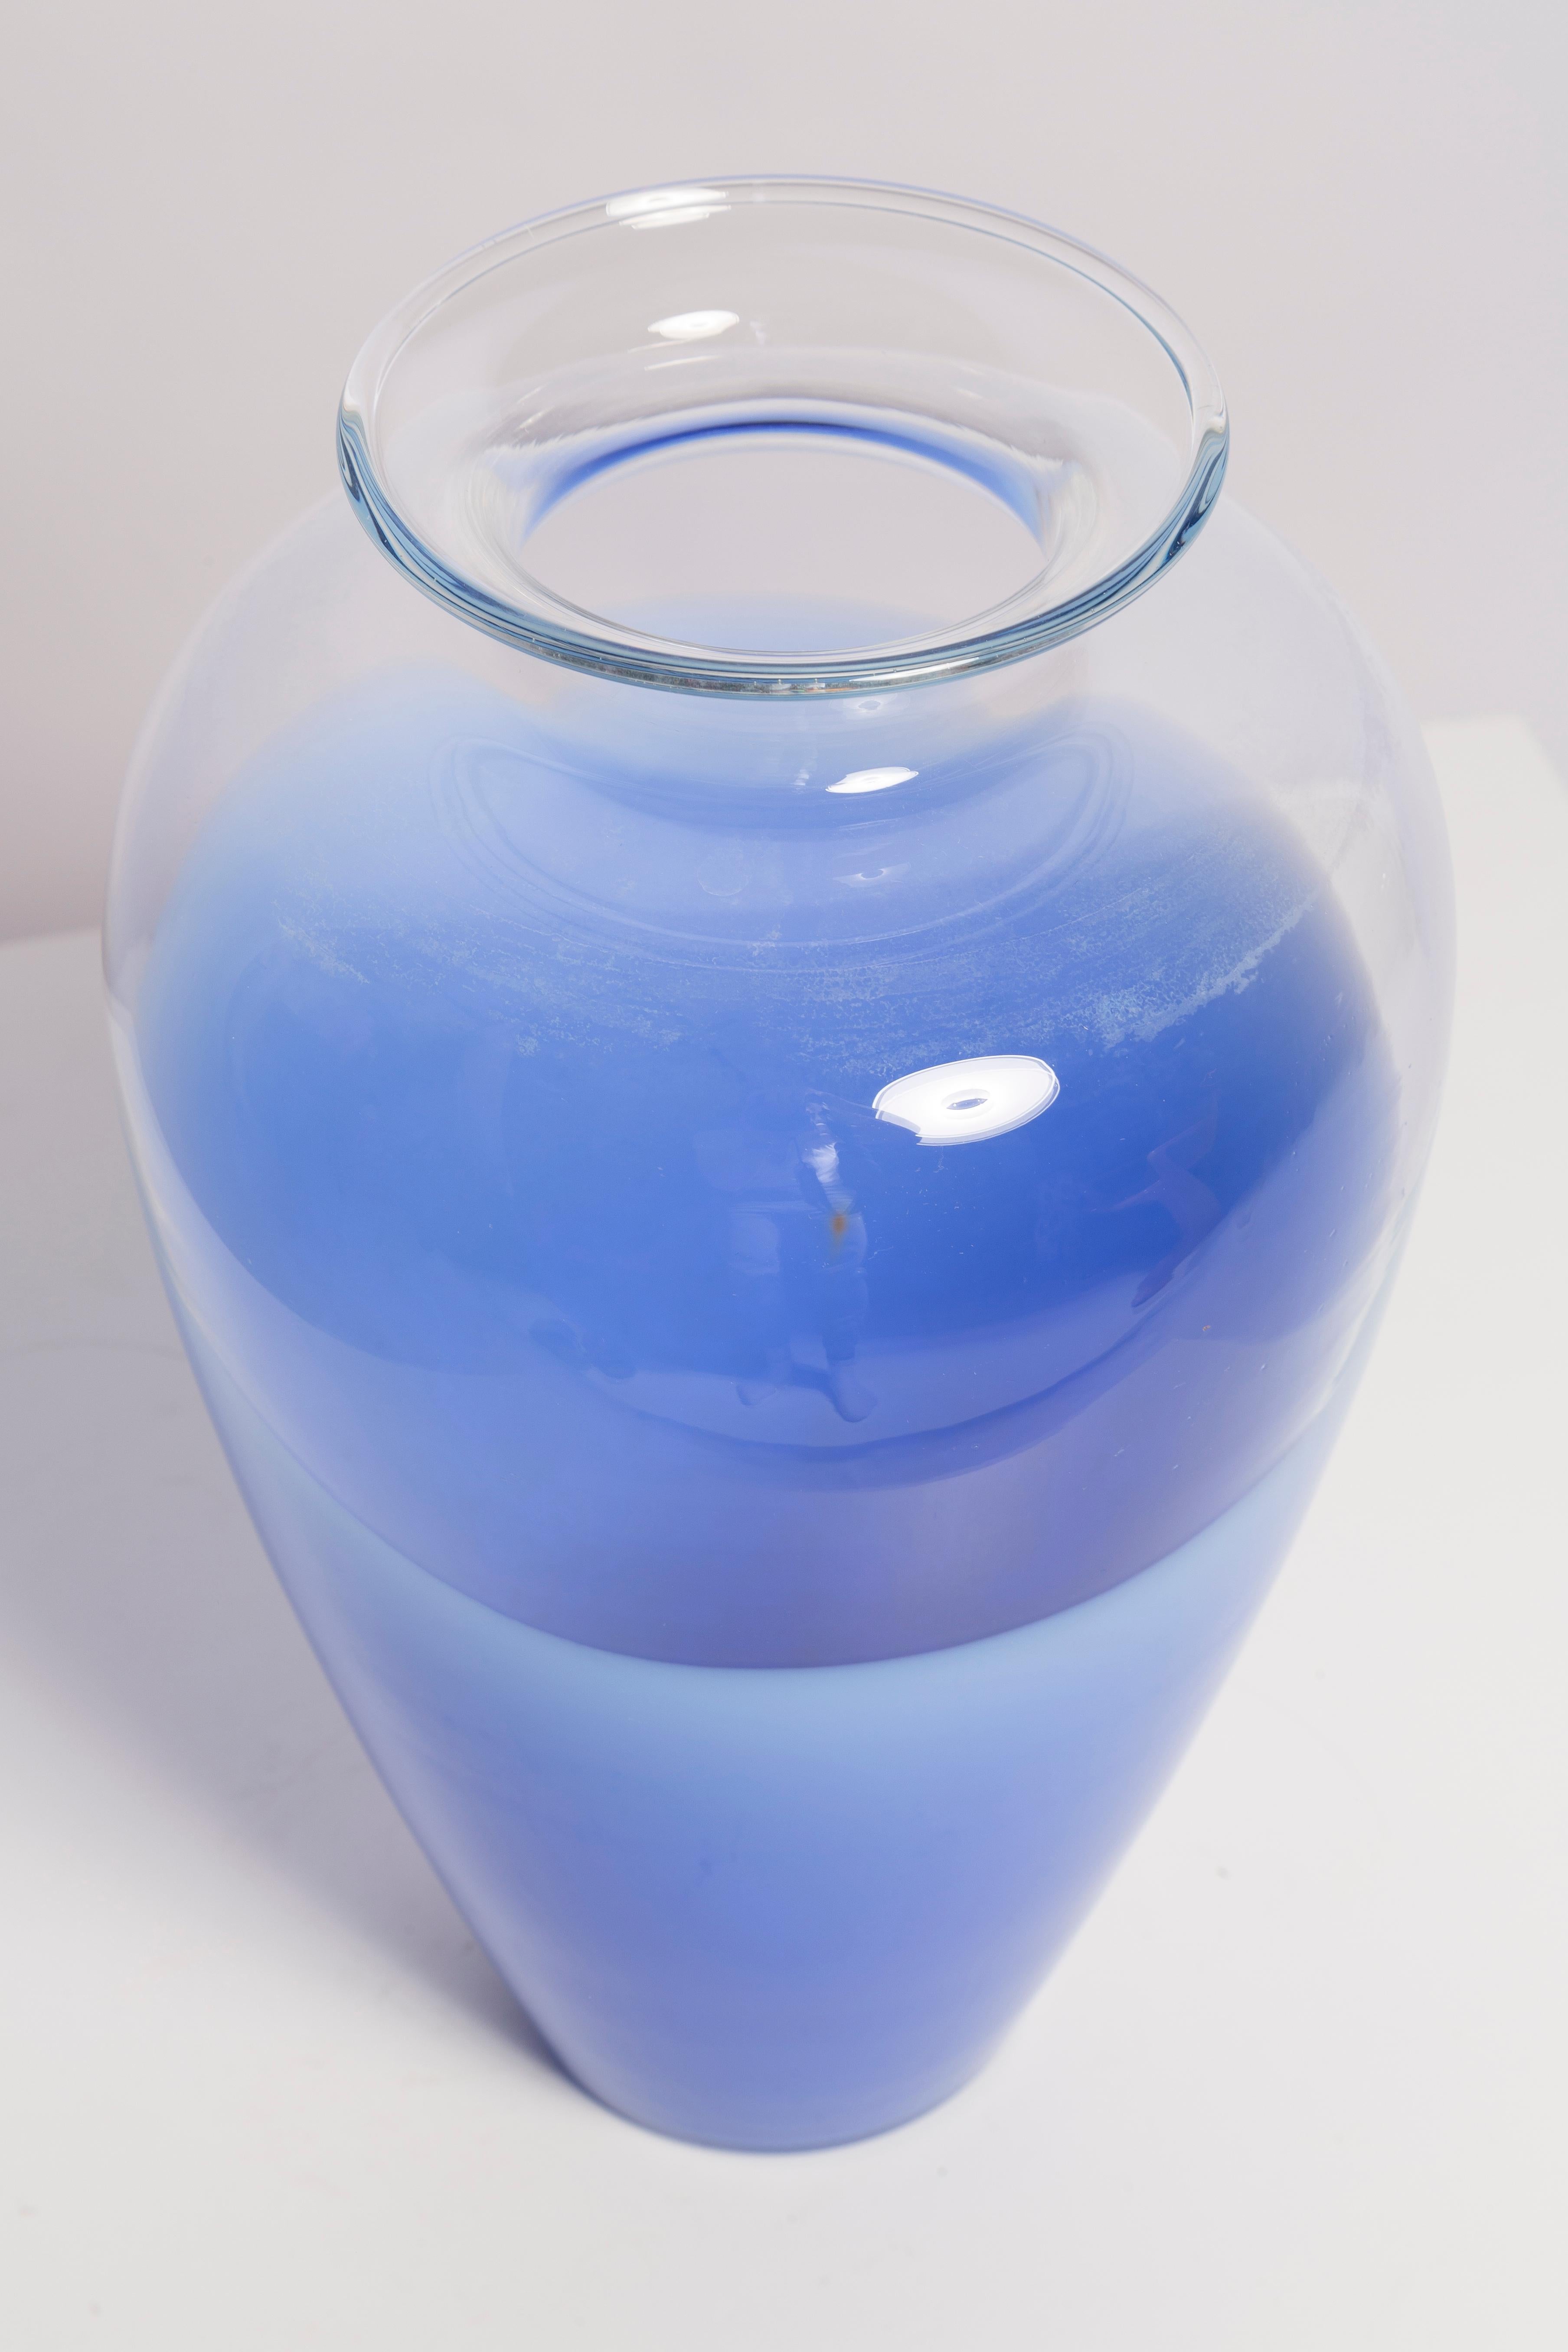 Mid Century Vintage Blue and Transparent Big Vase, Italy, 1960s For Sale 1